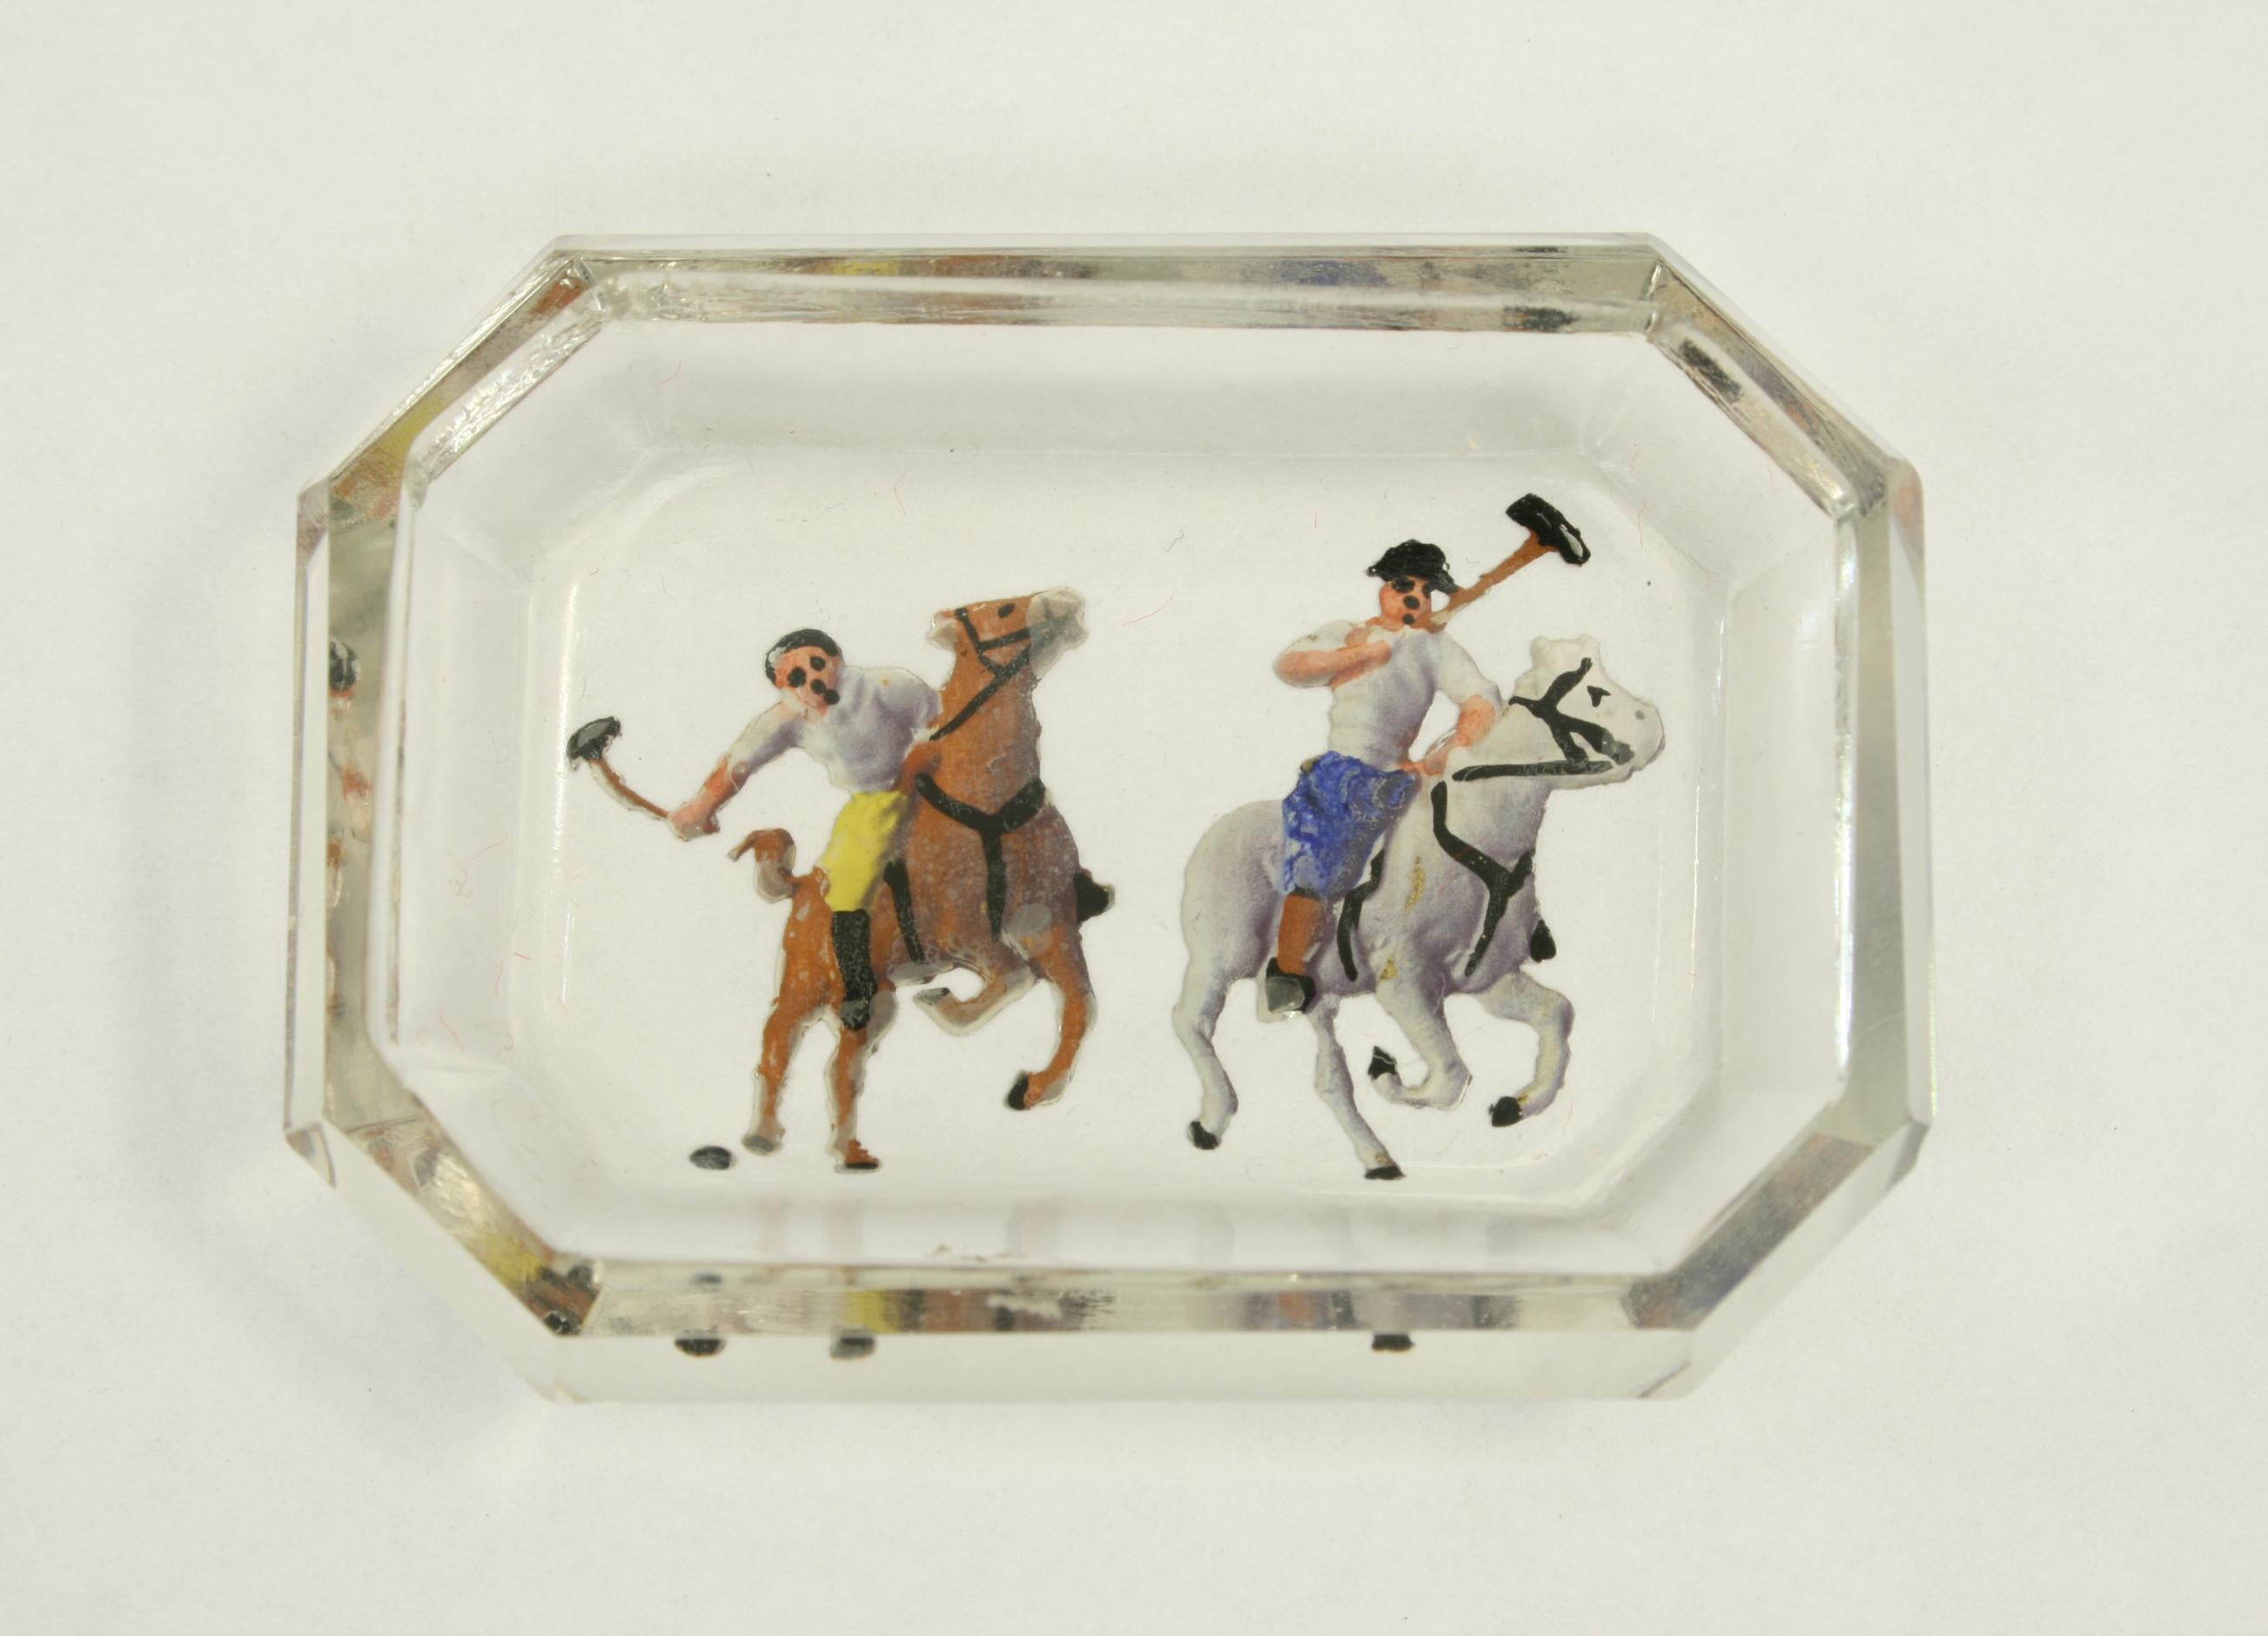 Antique / vintage polo glass pin tray, intaglio.
A small glass pin tray with intaglio images of polo players set into the base, which are then painted.
Intaglio are techniques in art in which an image is created by cutting, carving or engraving